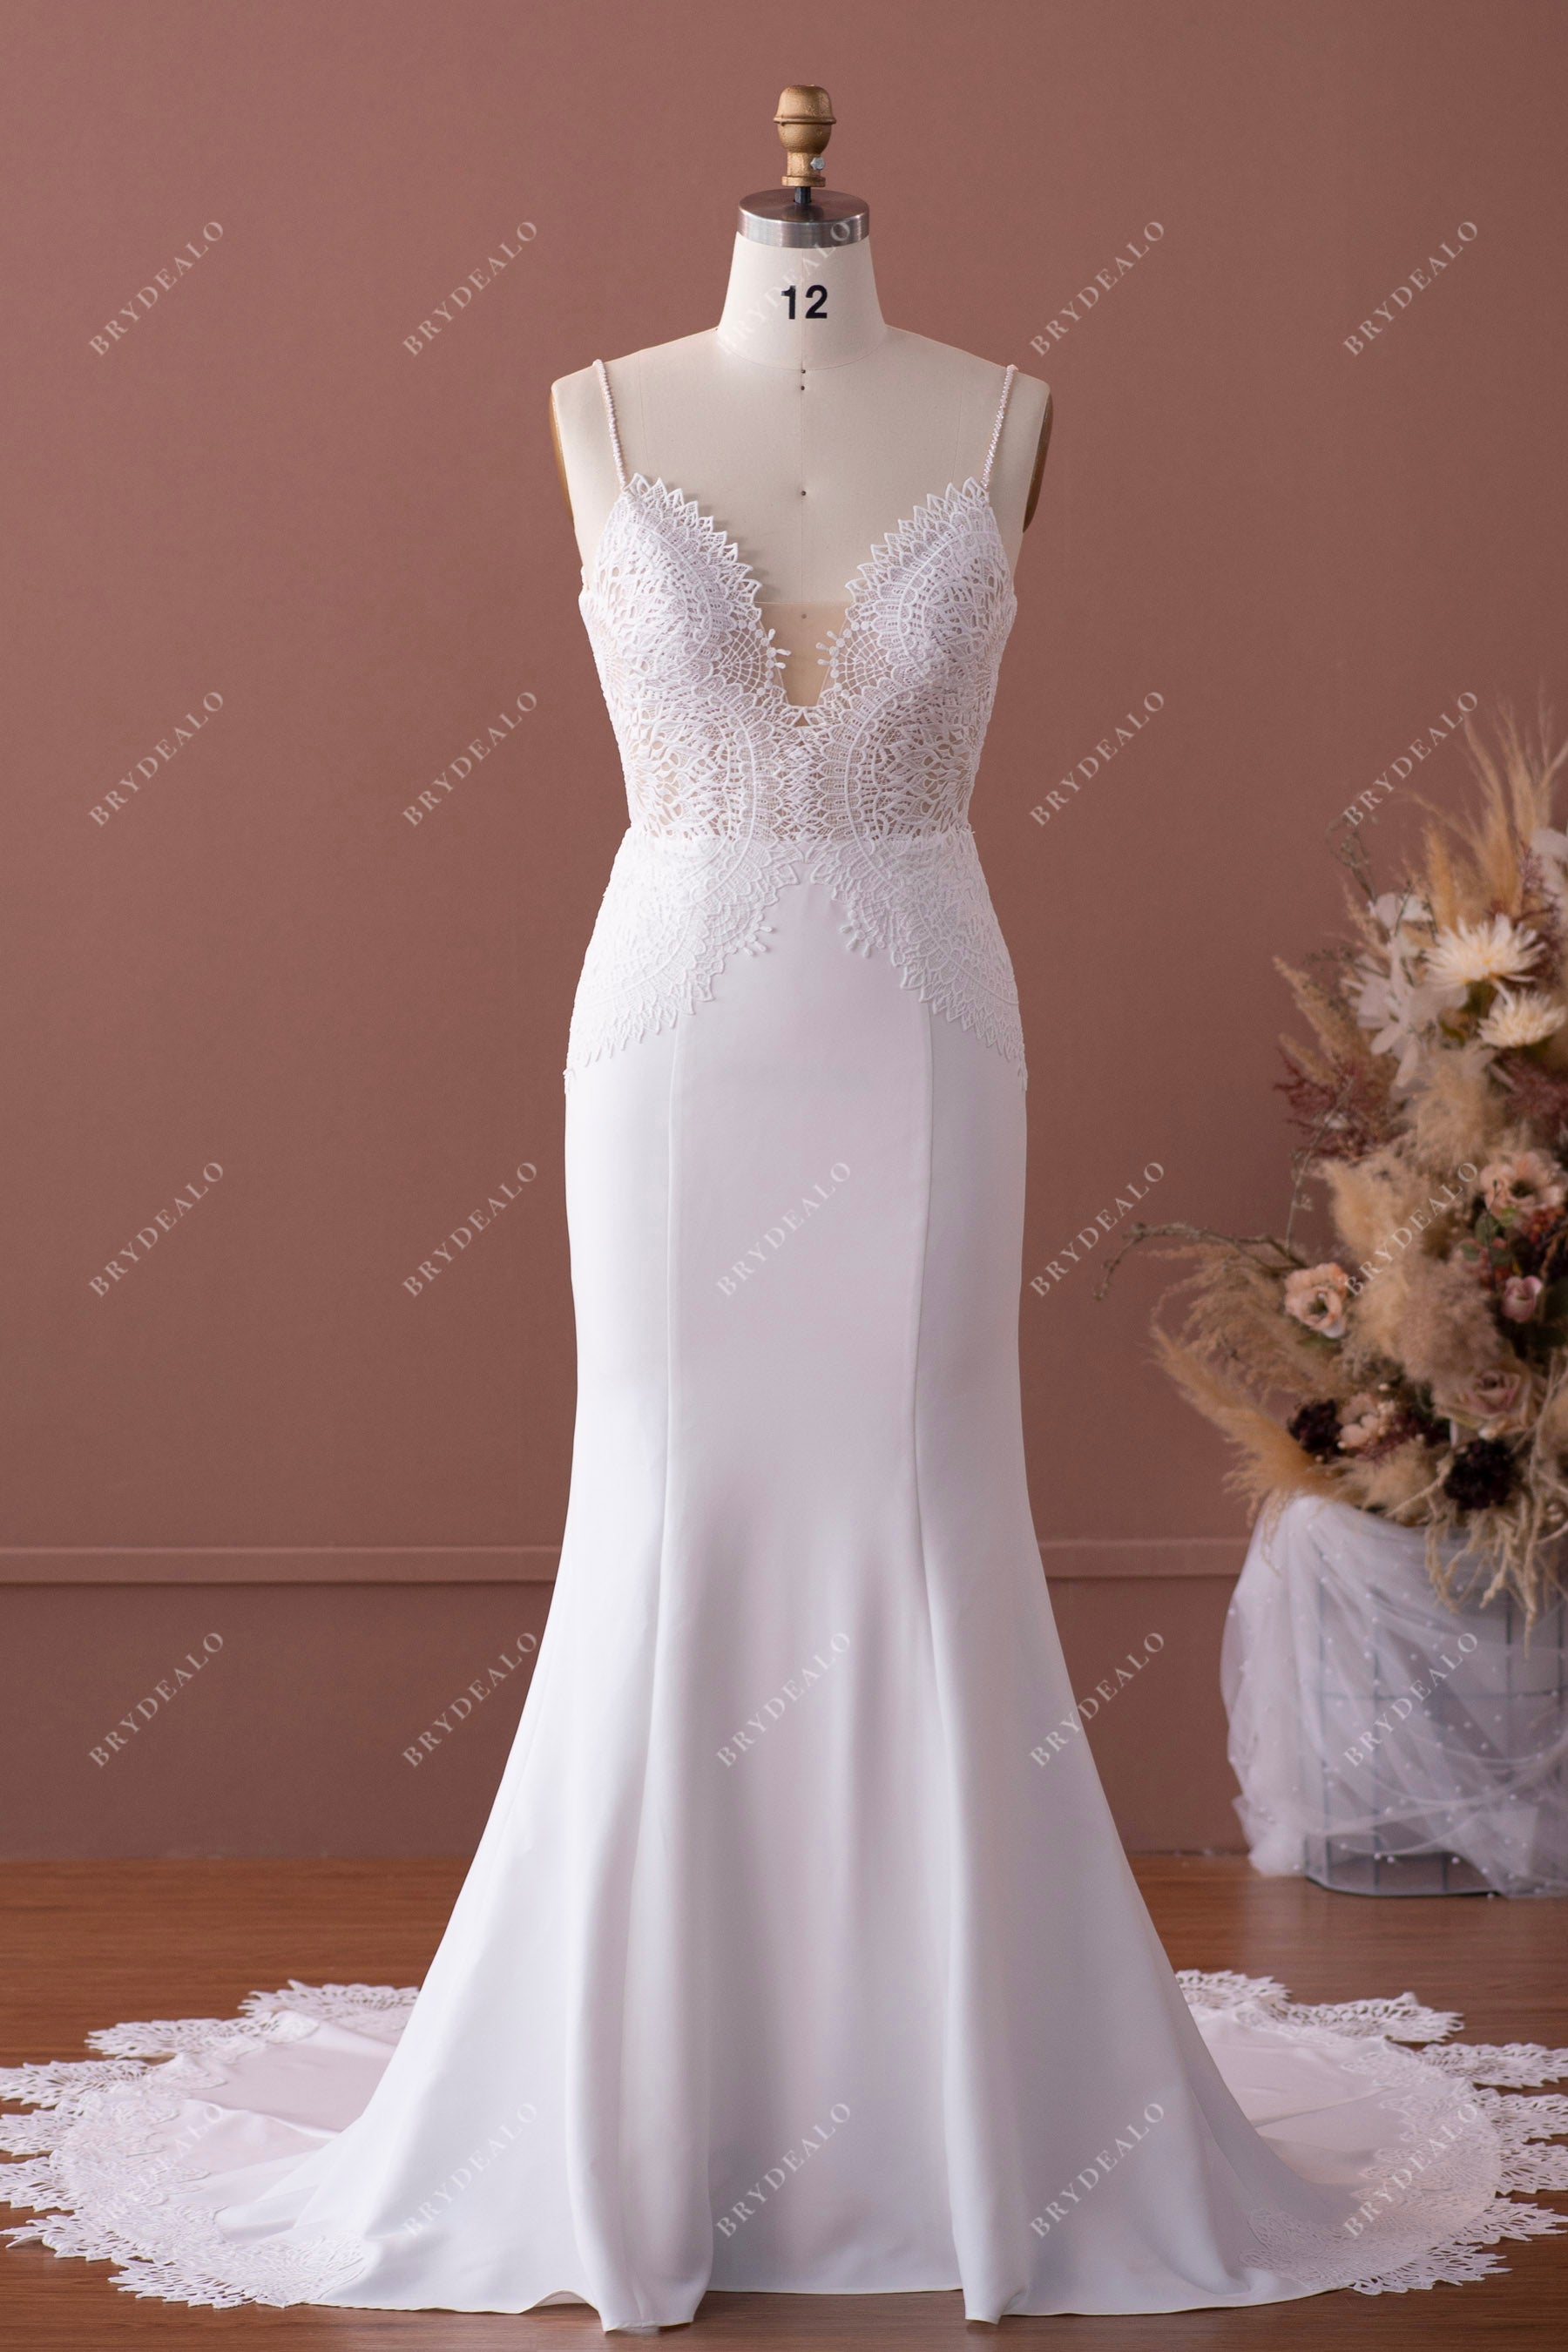 straps scalloped lace crepe mermaid wedding gown